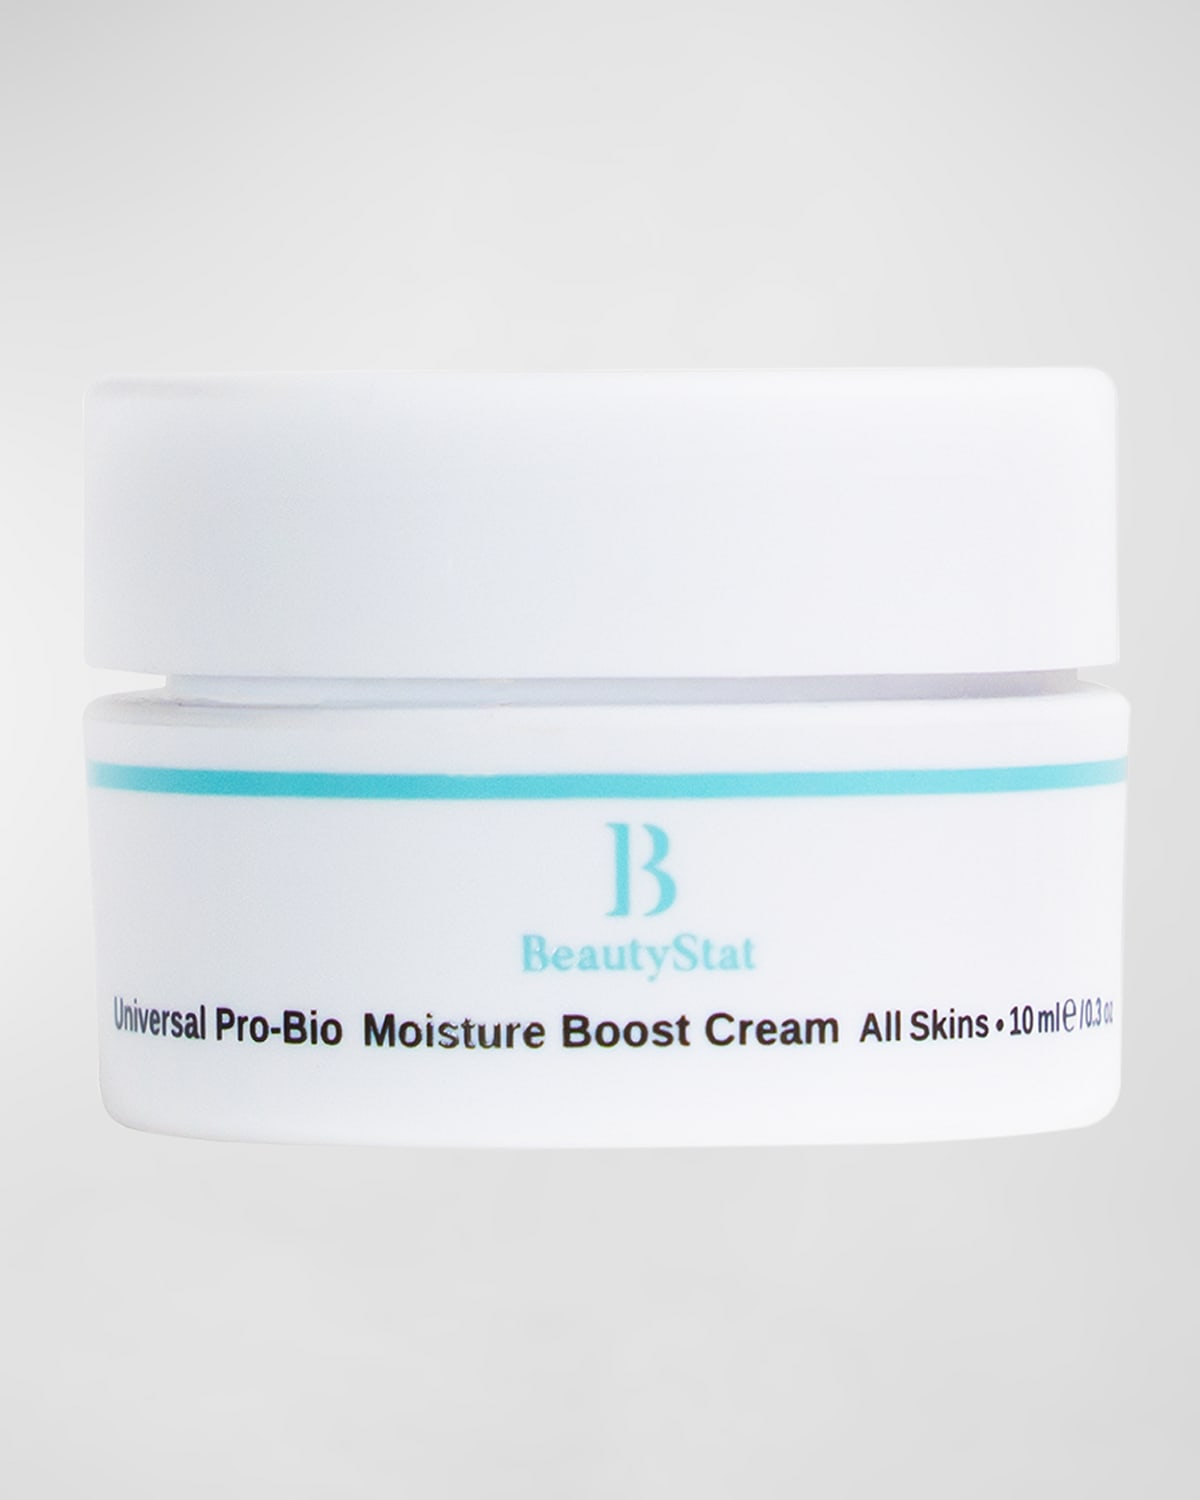 Universal Pro-Bio Moisture Boost Cream, 0.3 oz., Yours with any $45 BeautyStat Purchase